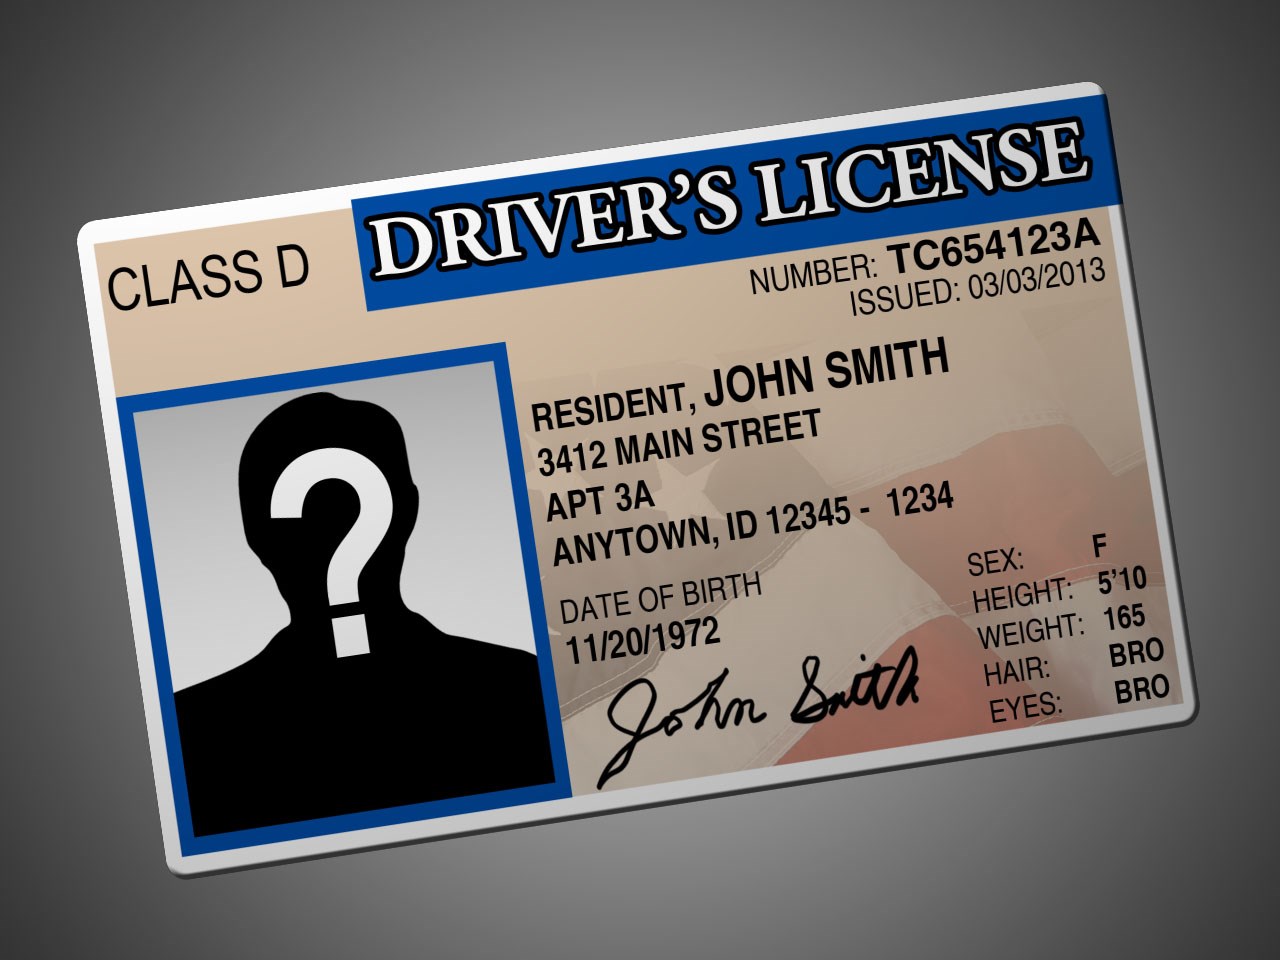 access-to-driver-s-license-is-basic-right-for-all-minnesota-spokesman